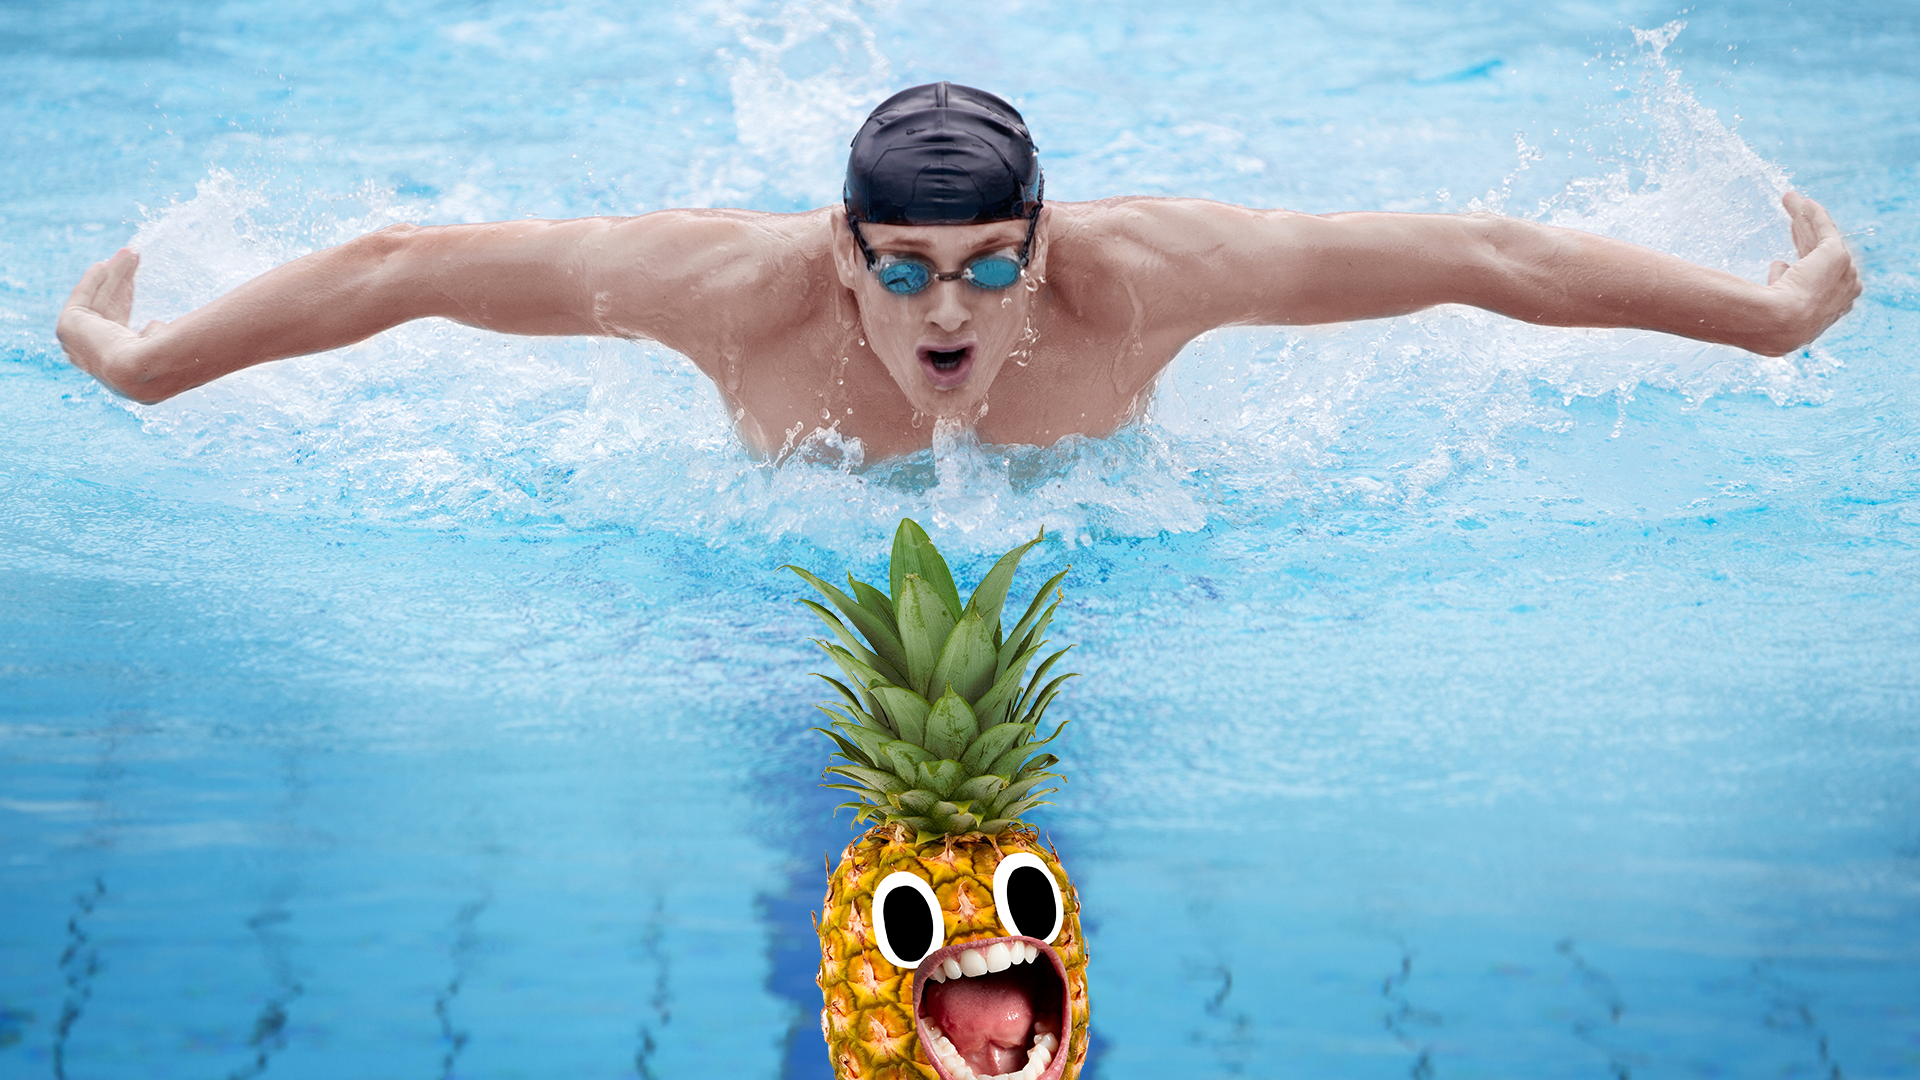 Swimmer in pool and screaming pineapple 